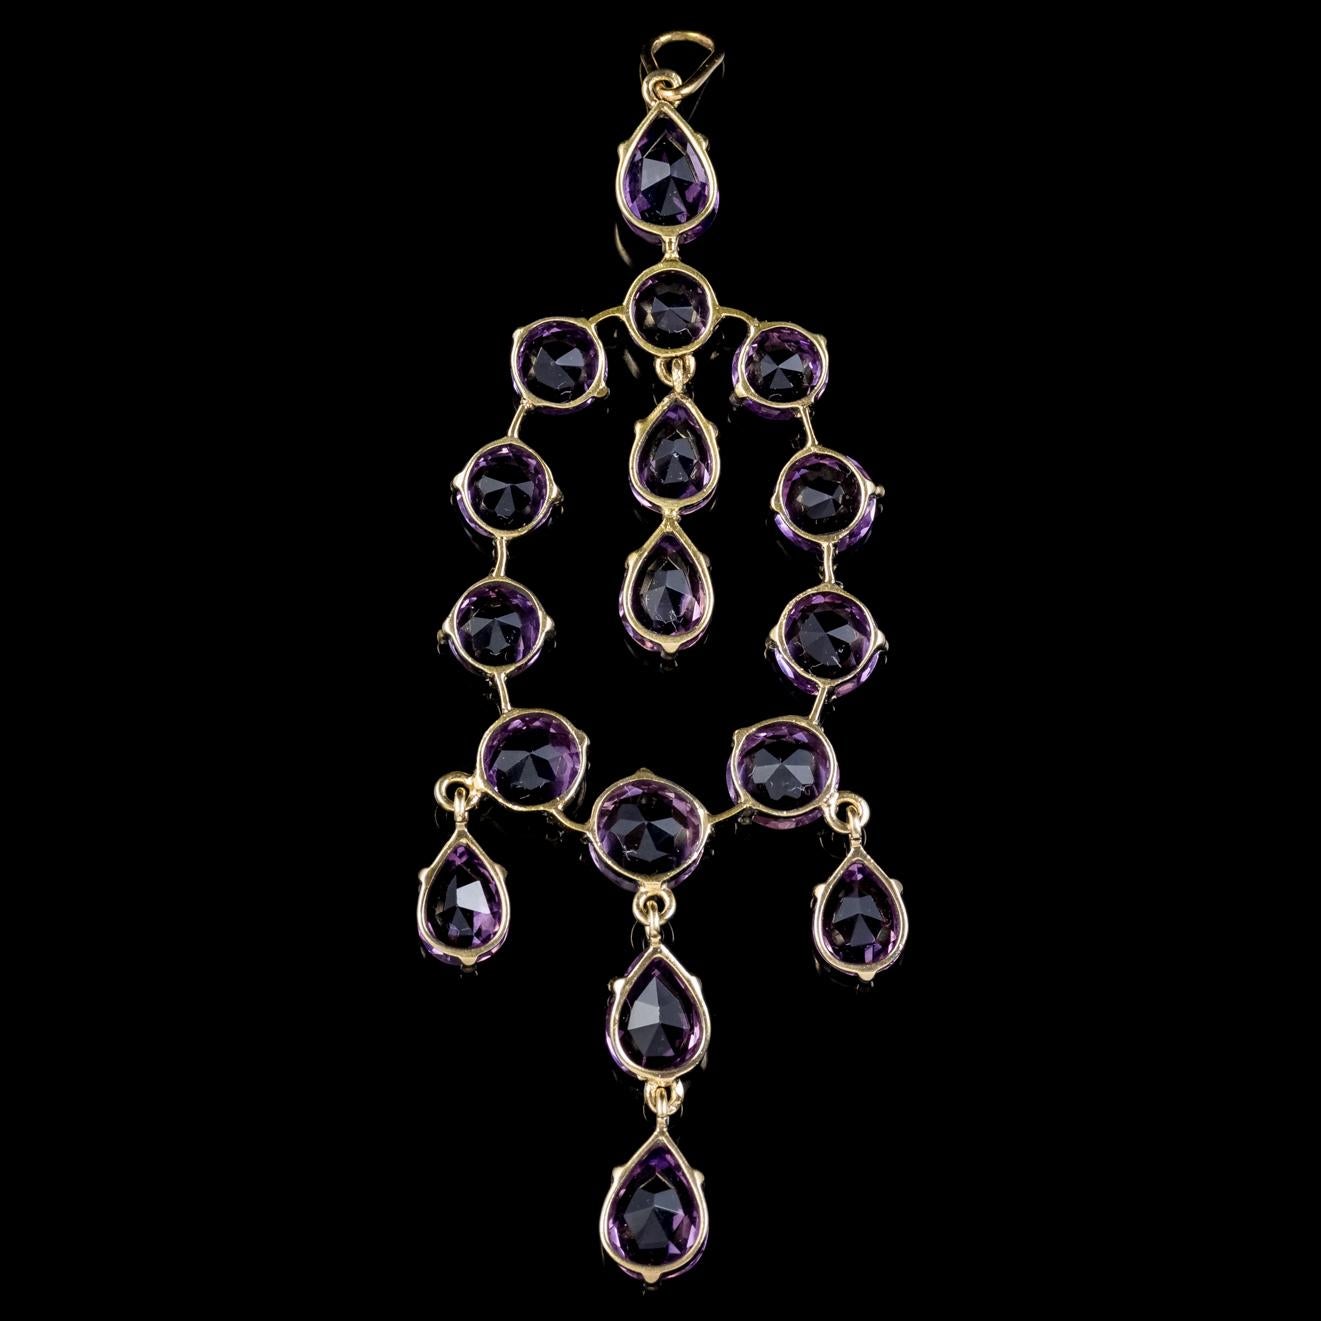 A fabulous antique Amethyst dropper pendant from the Victorian era, Circa 1900. 

The lovely piece is made up of seventeen royal purple Amethyst’s and features four Amethyst droppers dangling from the gallery. 

Amethyst has been highly esteemed